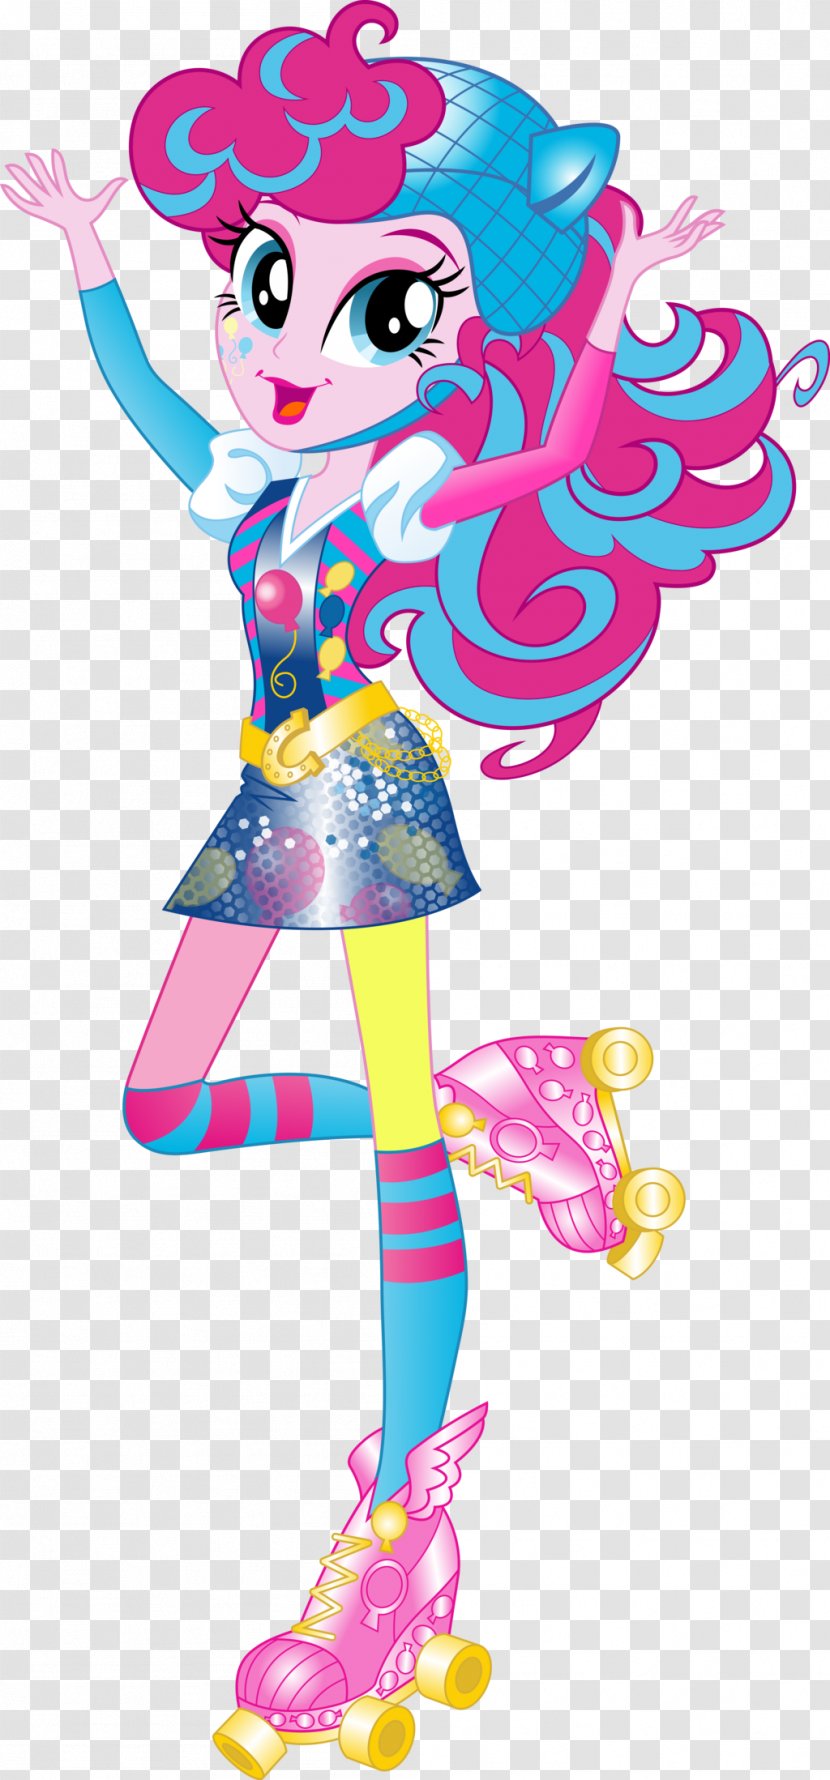 Pinkie Pie Rarity My Little Pony: Equestria Girls Image Illustration - Fictional Character - Fluttershy Doll Box Back Transparent PNG